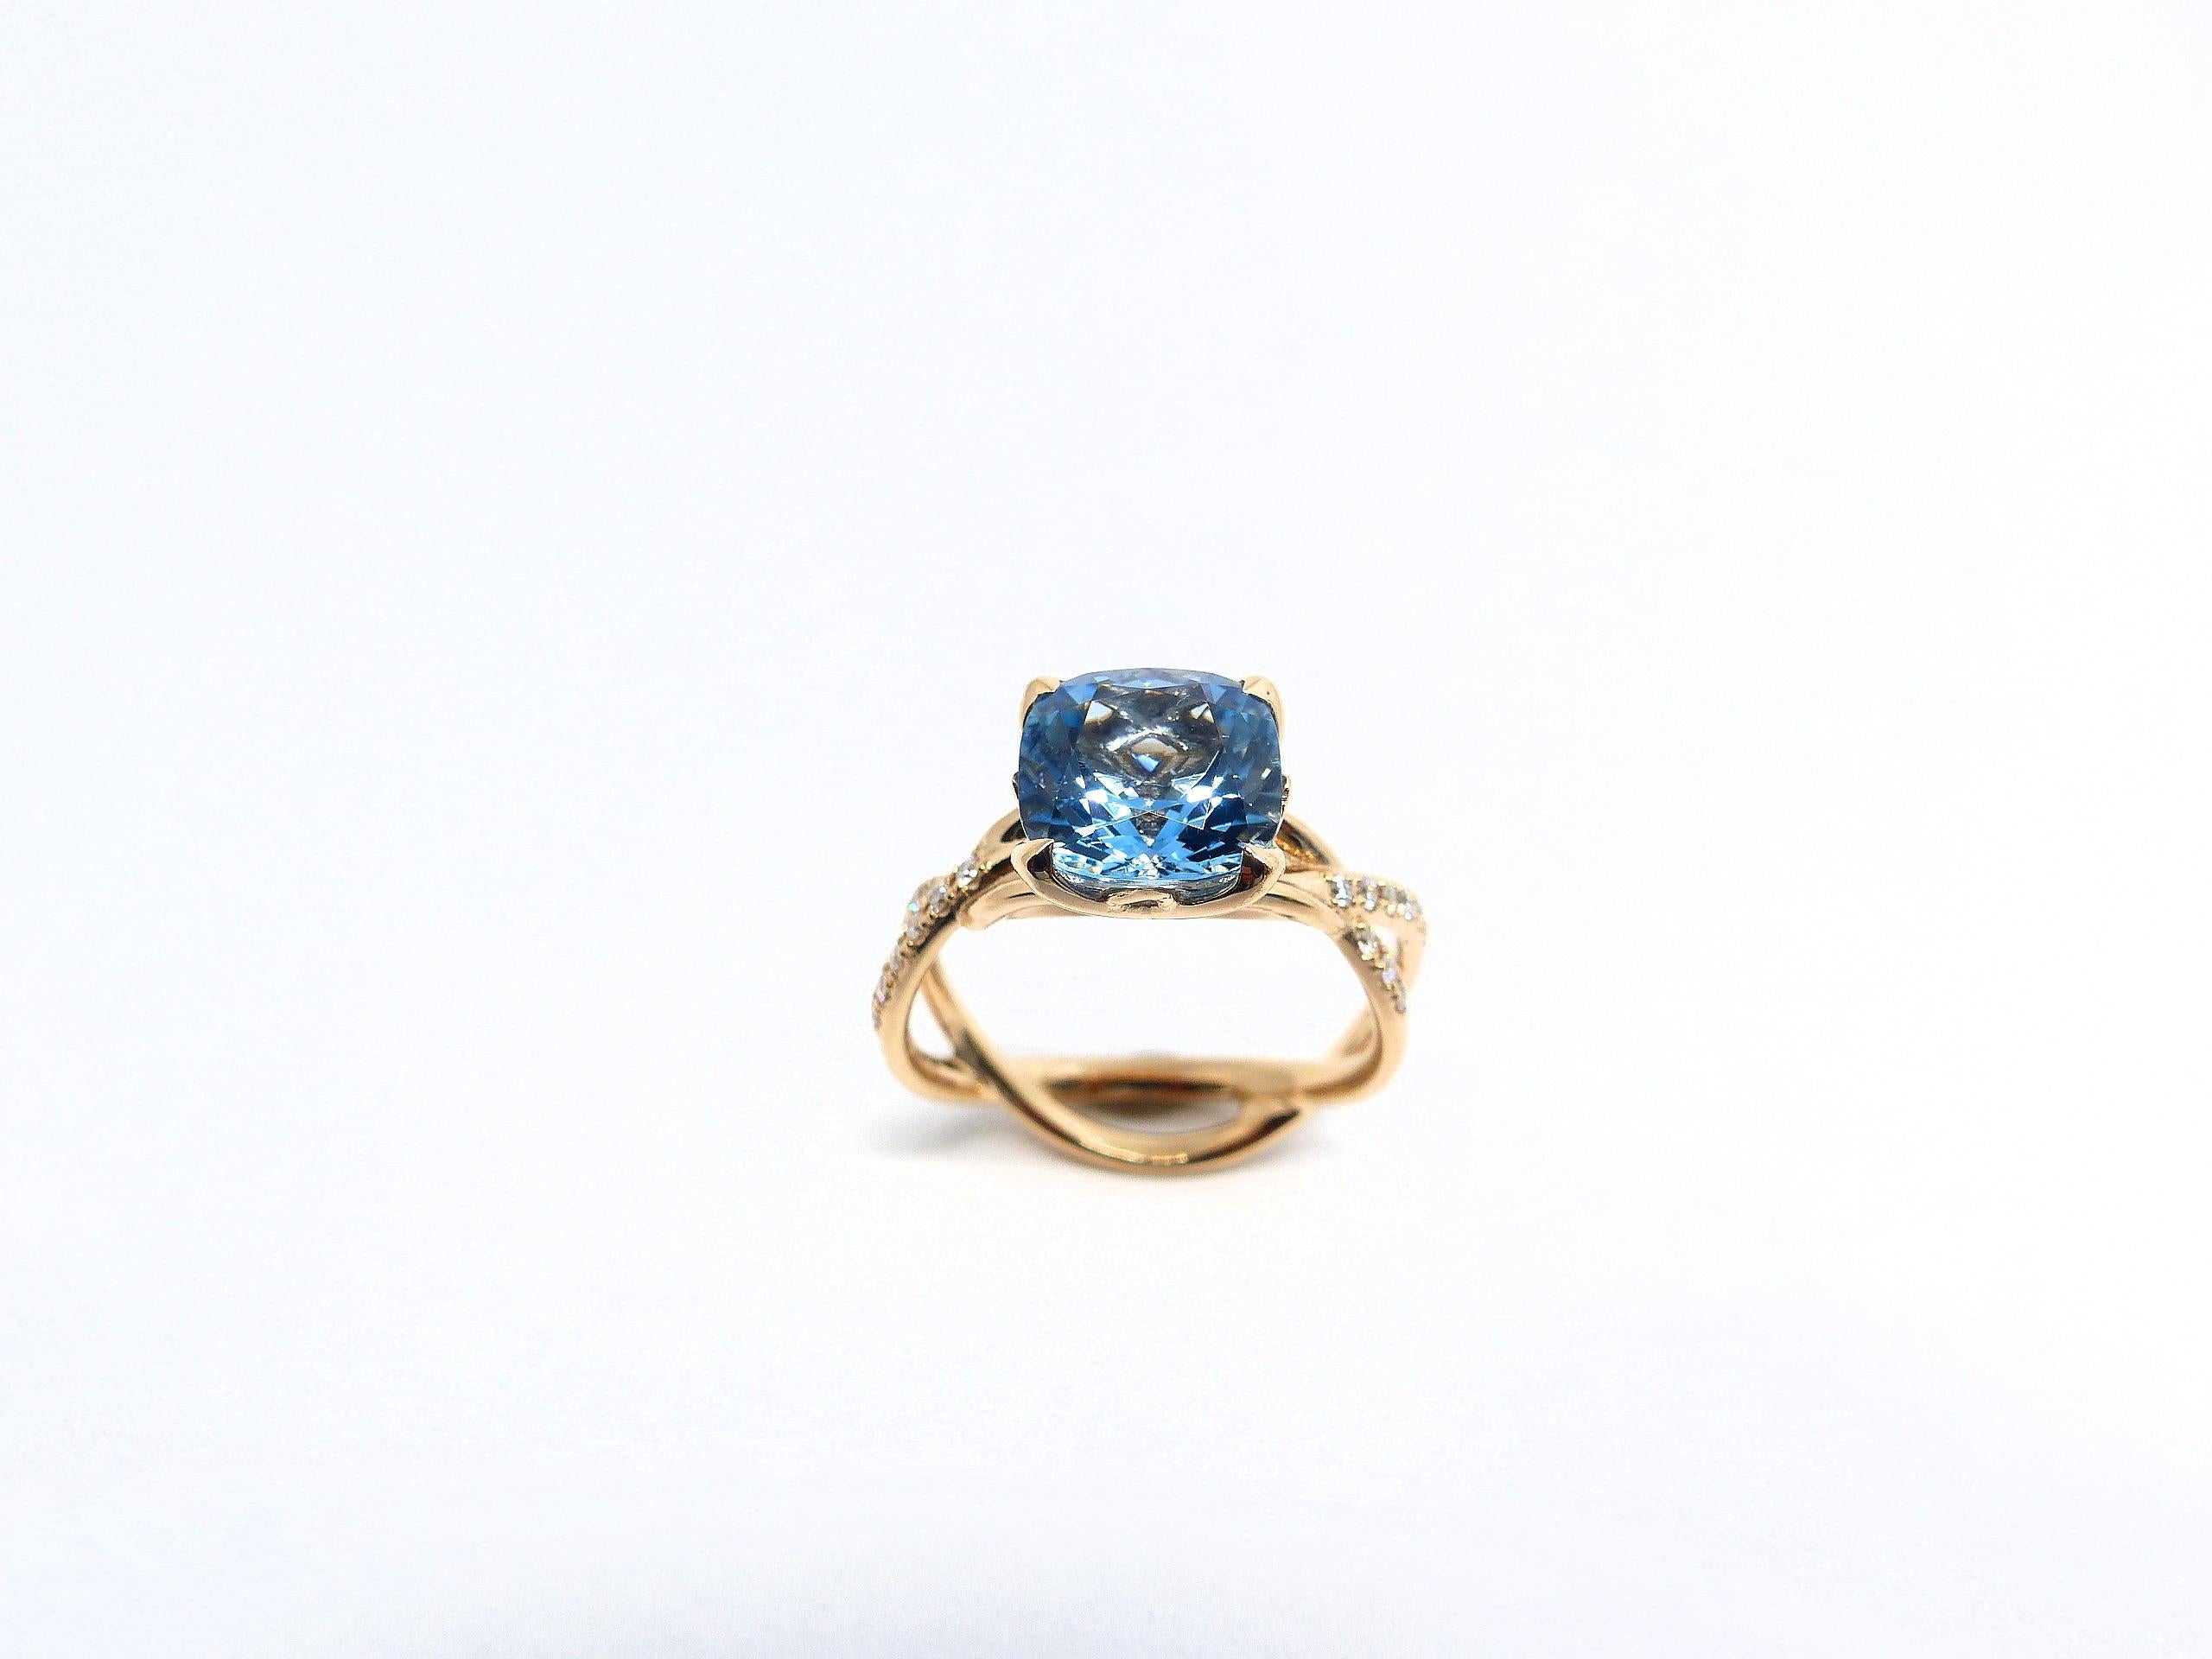 Women's Ring in Rose Gold with 1 Aquamarine Cushion Shape 9x9mm and Diamonds. For Sale